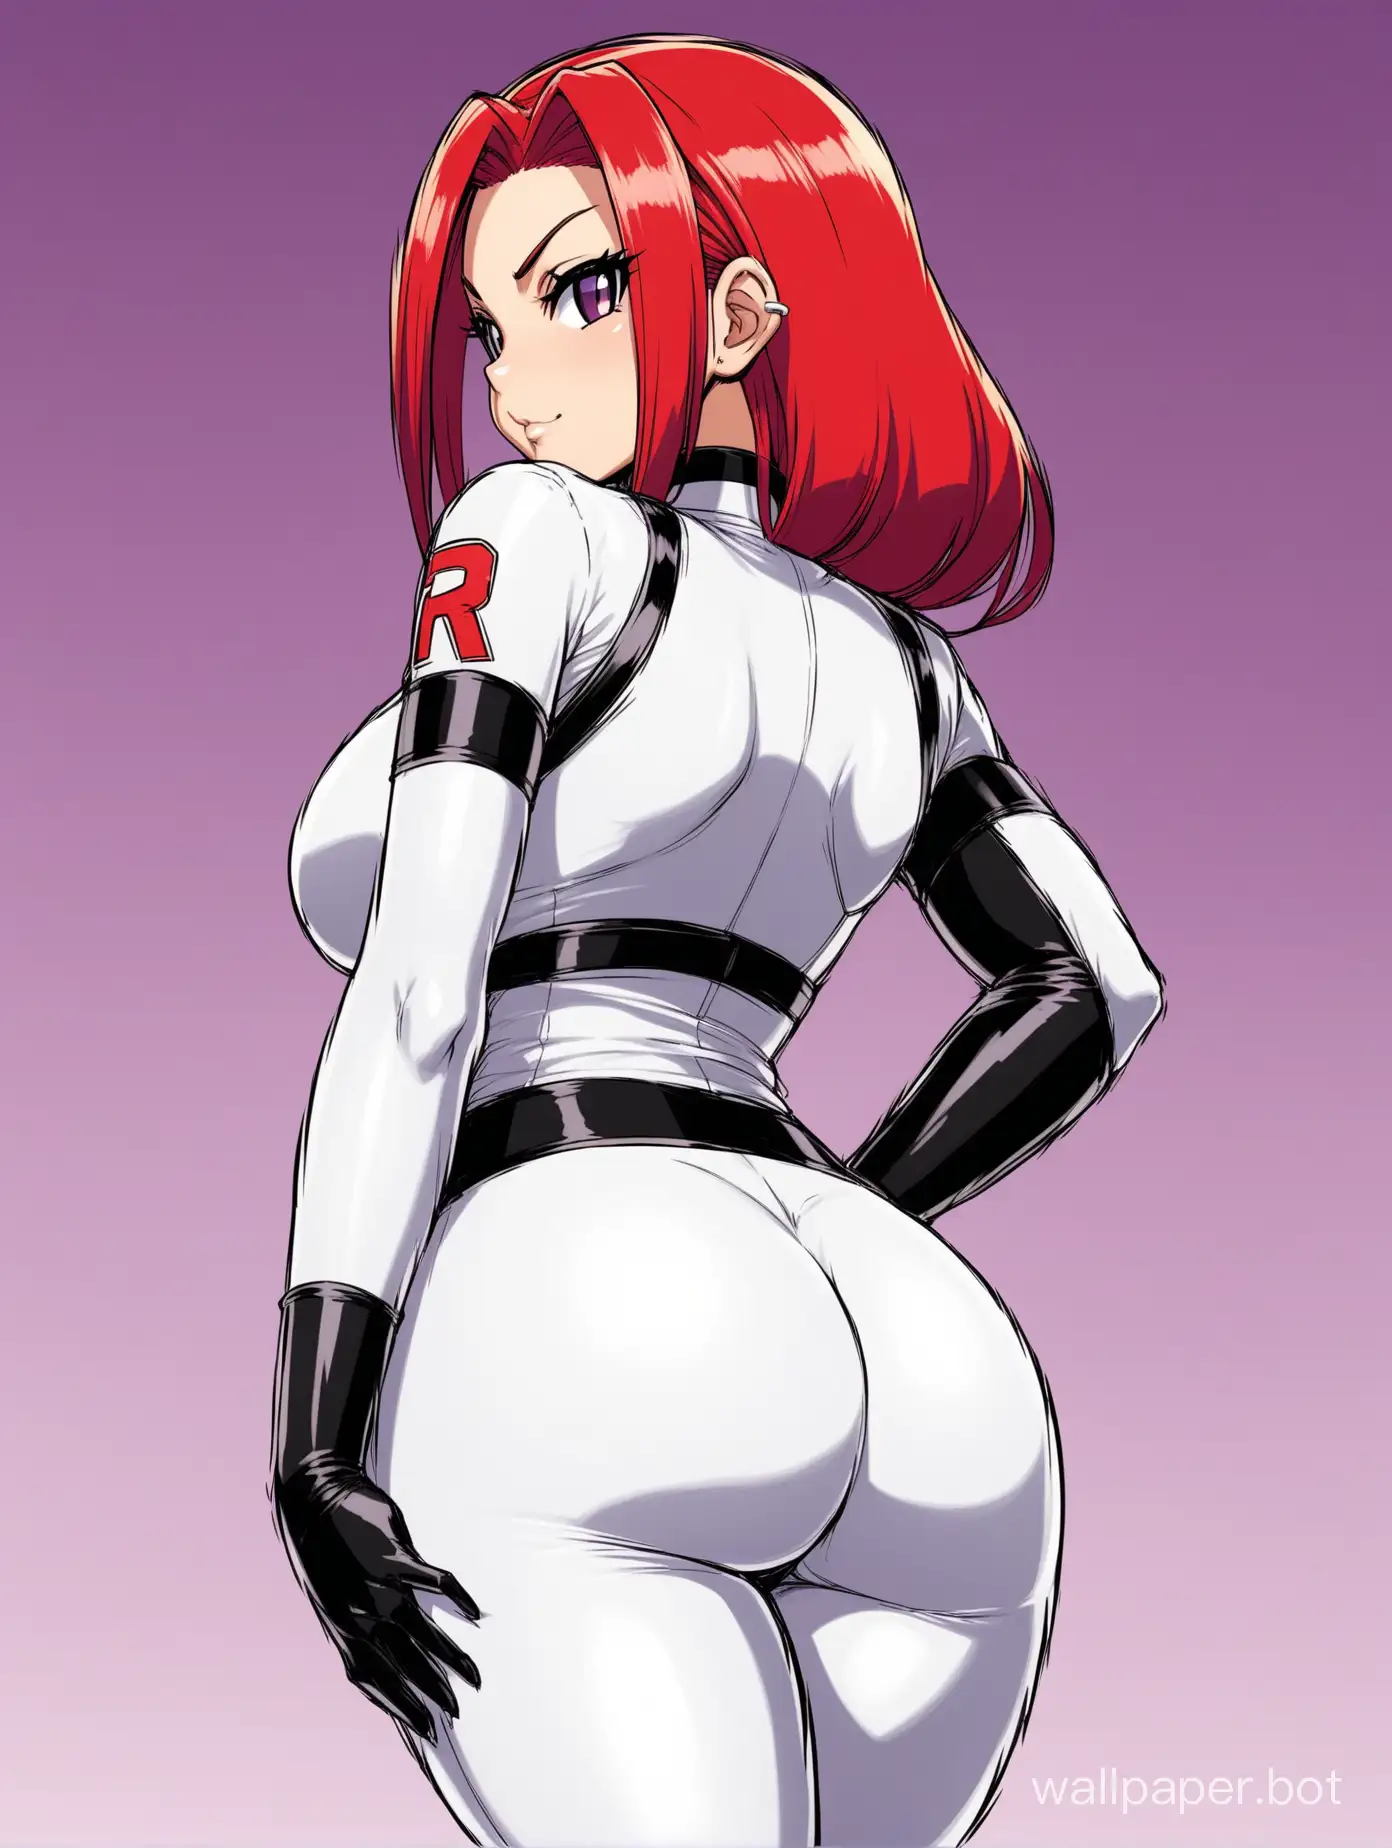 Jessie-Team-Rocket-Sexy-Pose-with-Emphasized-Curves